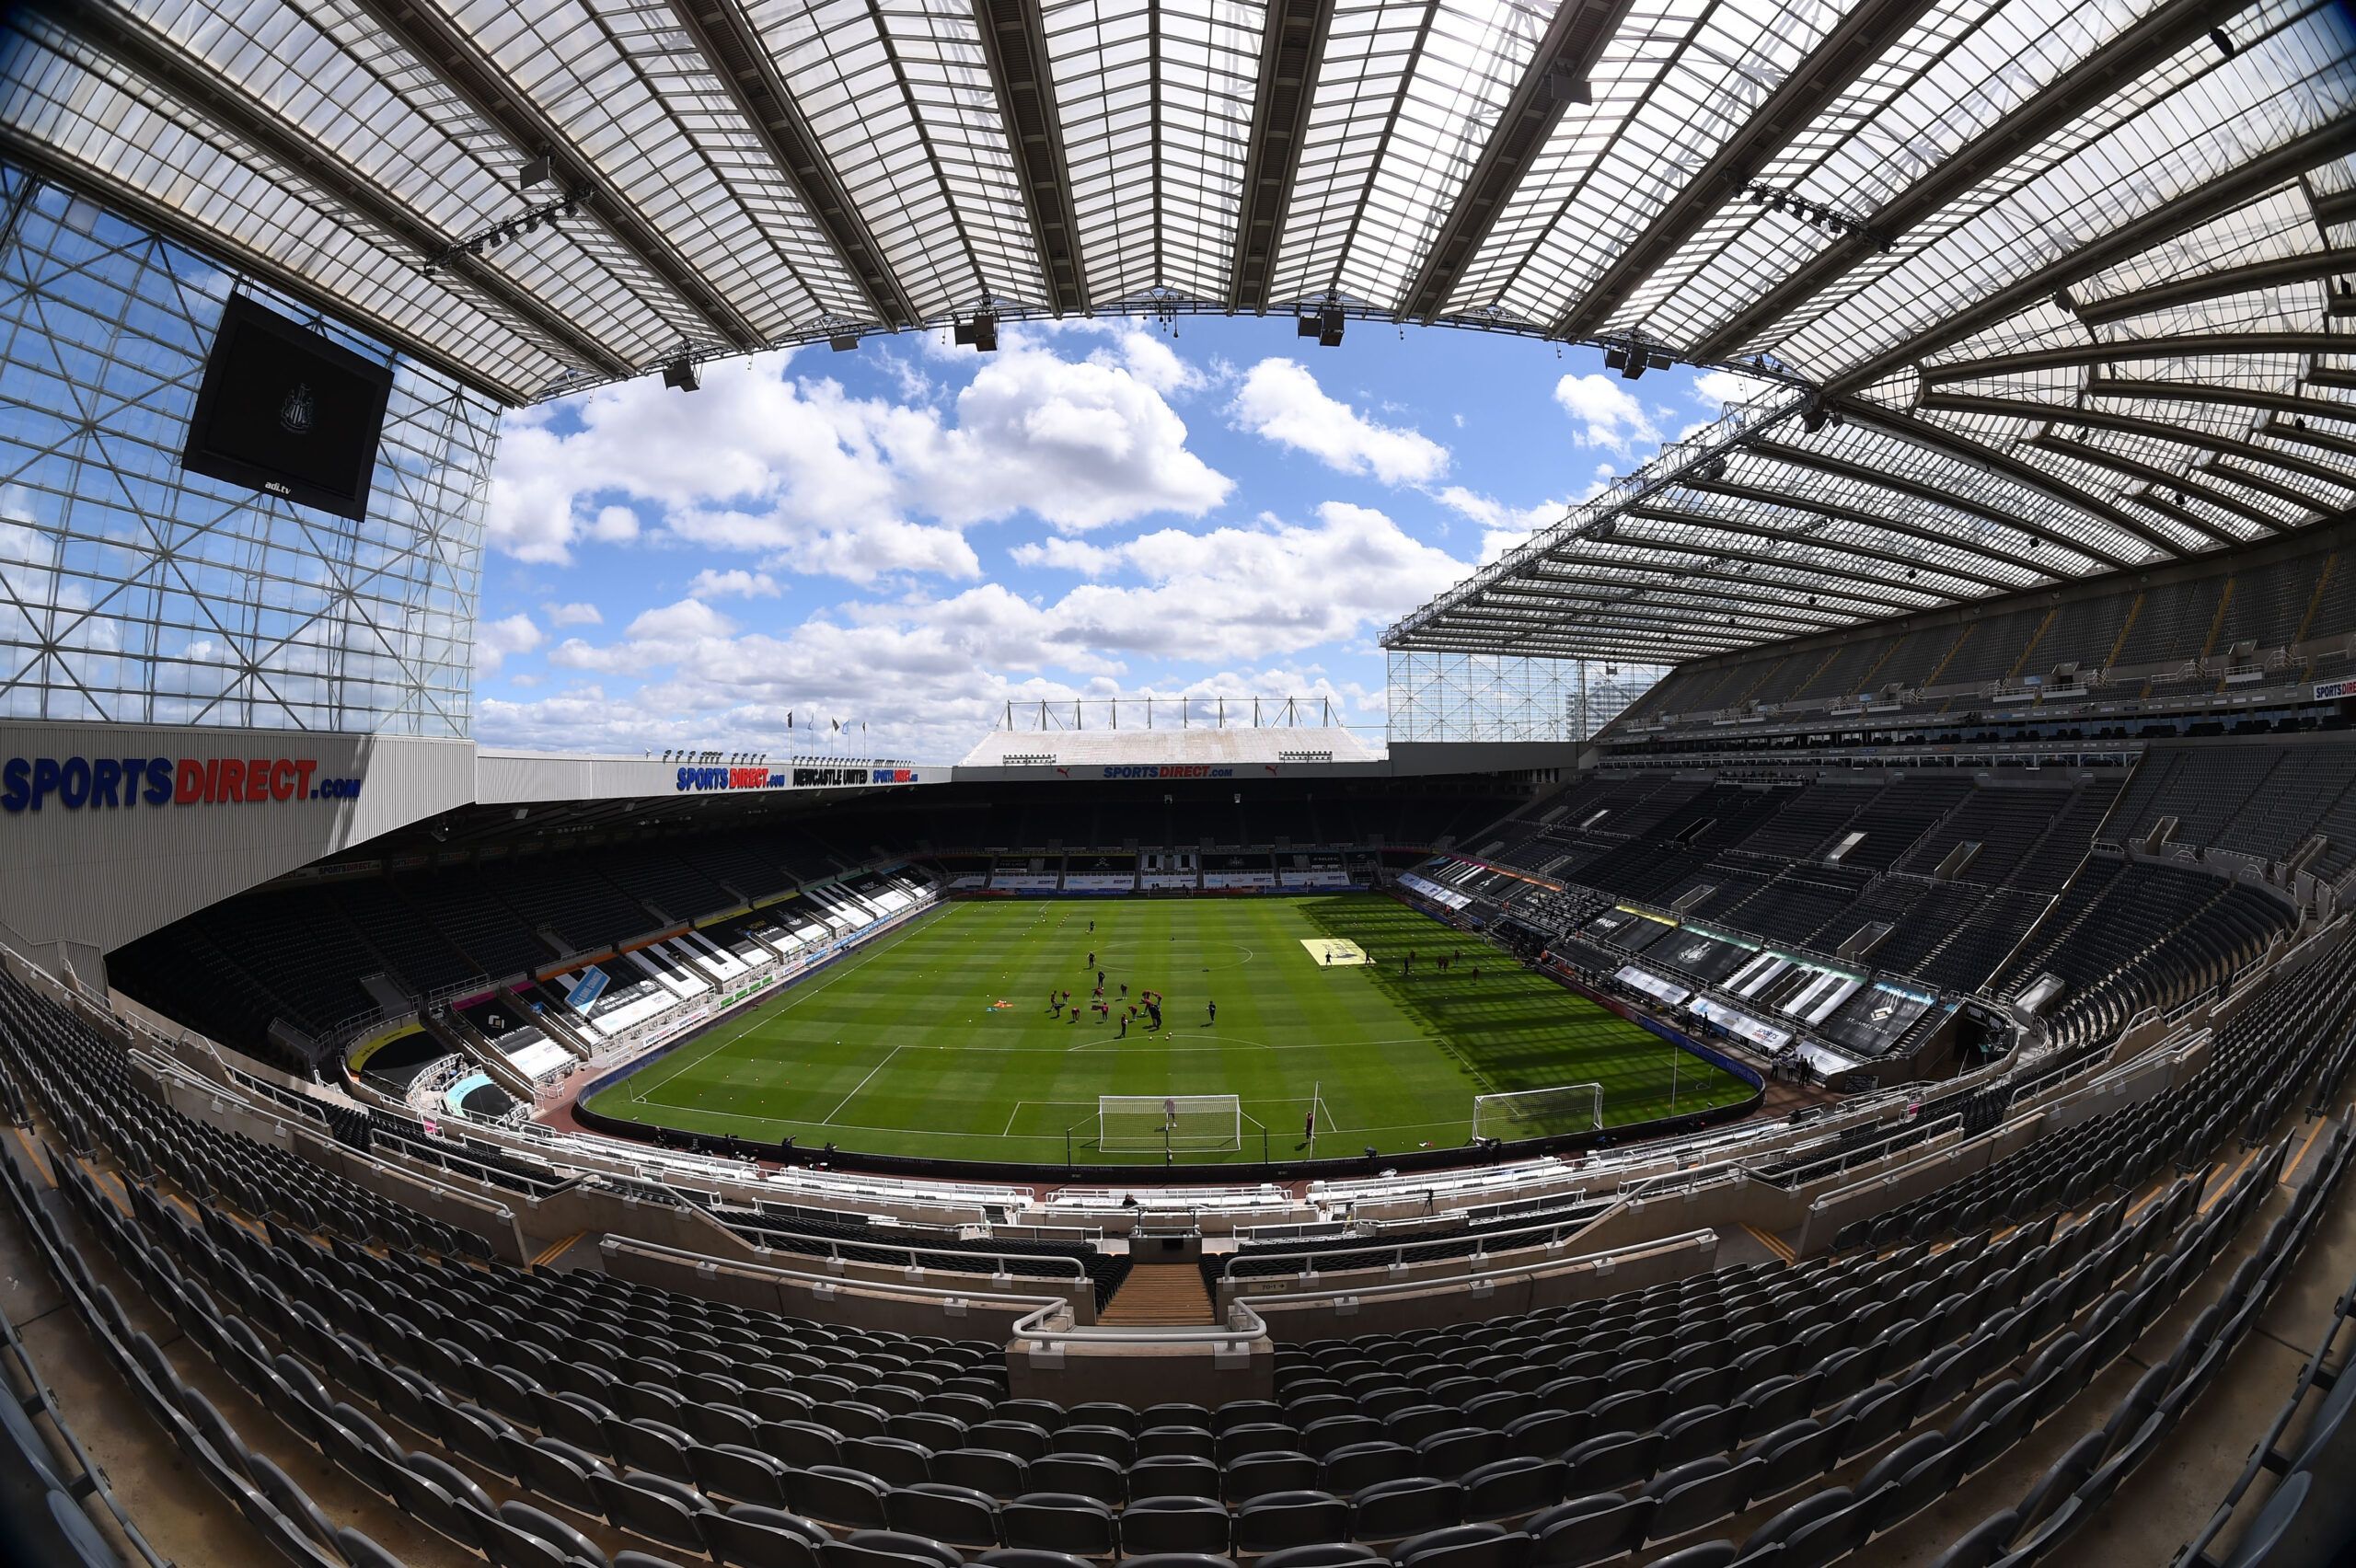 General view inside the stadium of St James' Park